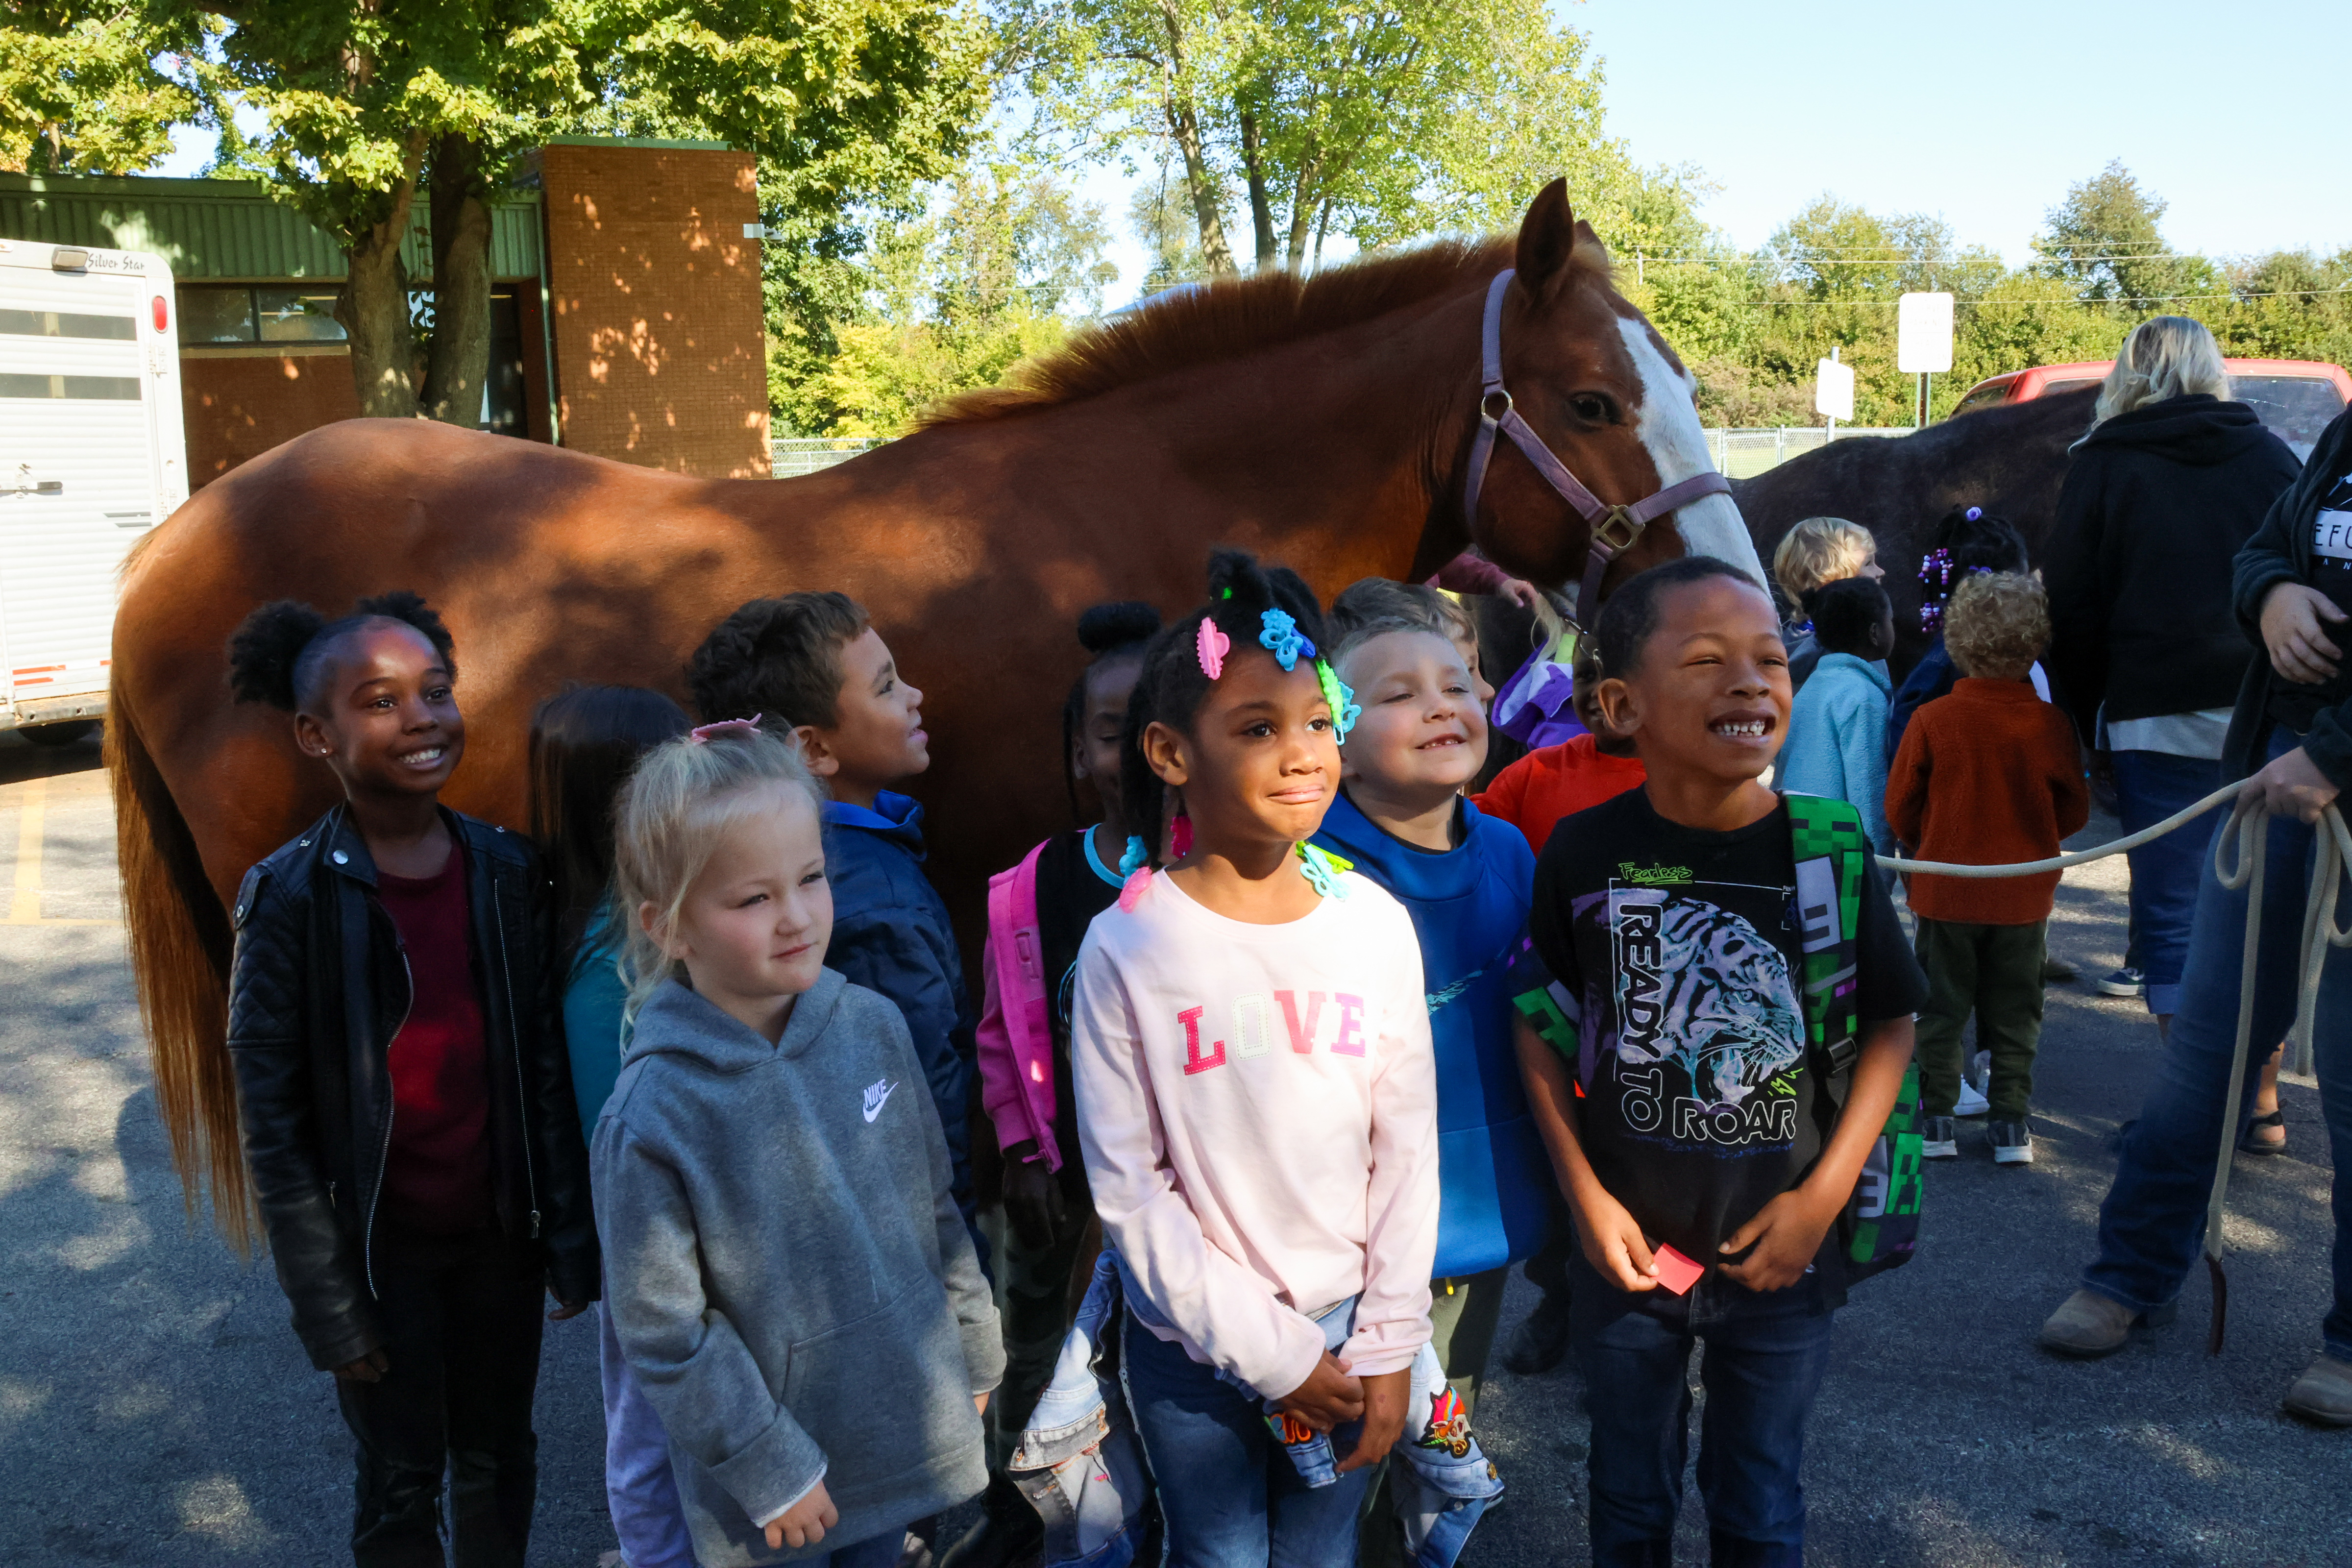 lee students smiling by horse